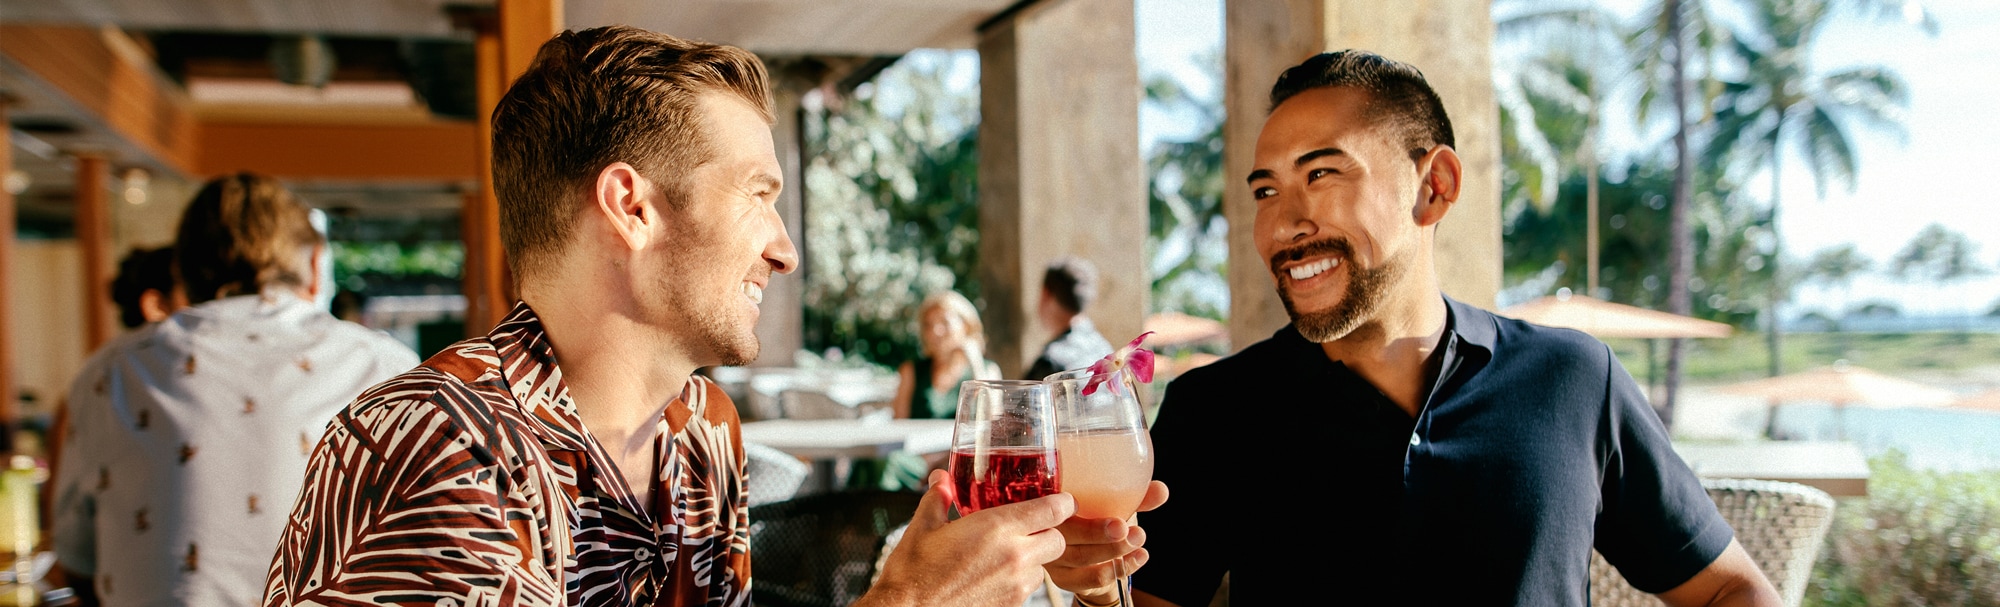 Two smiling young men sitting at a patio table clink their beverage glasses